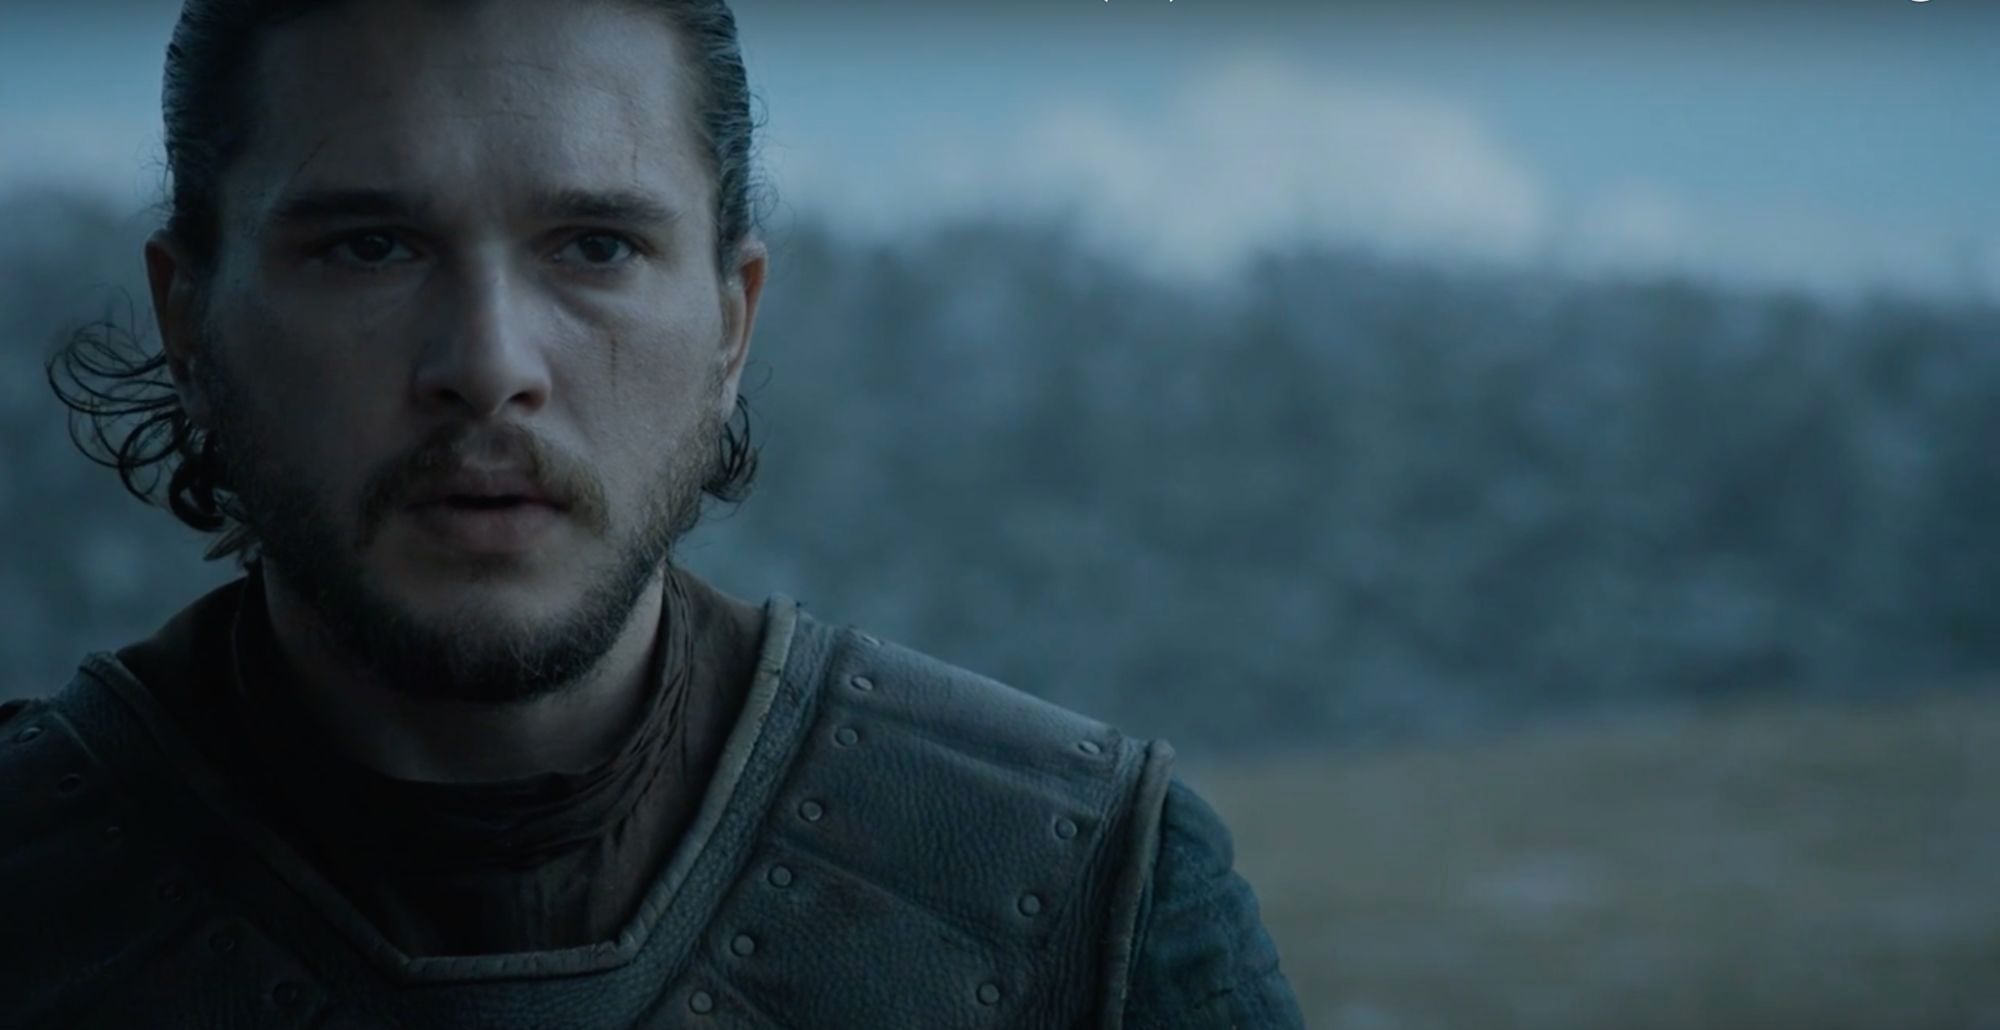 Game of Thrones: Battle of the Bastards Trailer - Jon Snow Outnumbered2000 x 1030